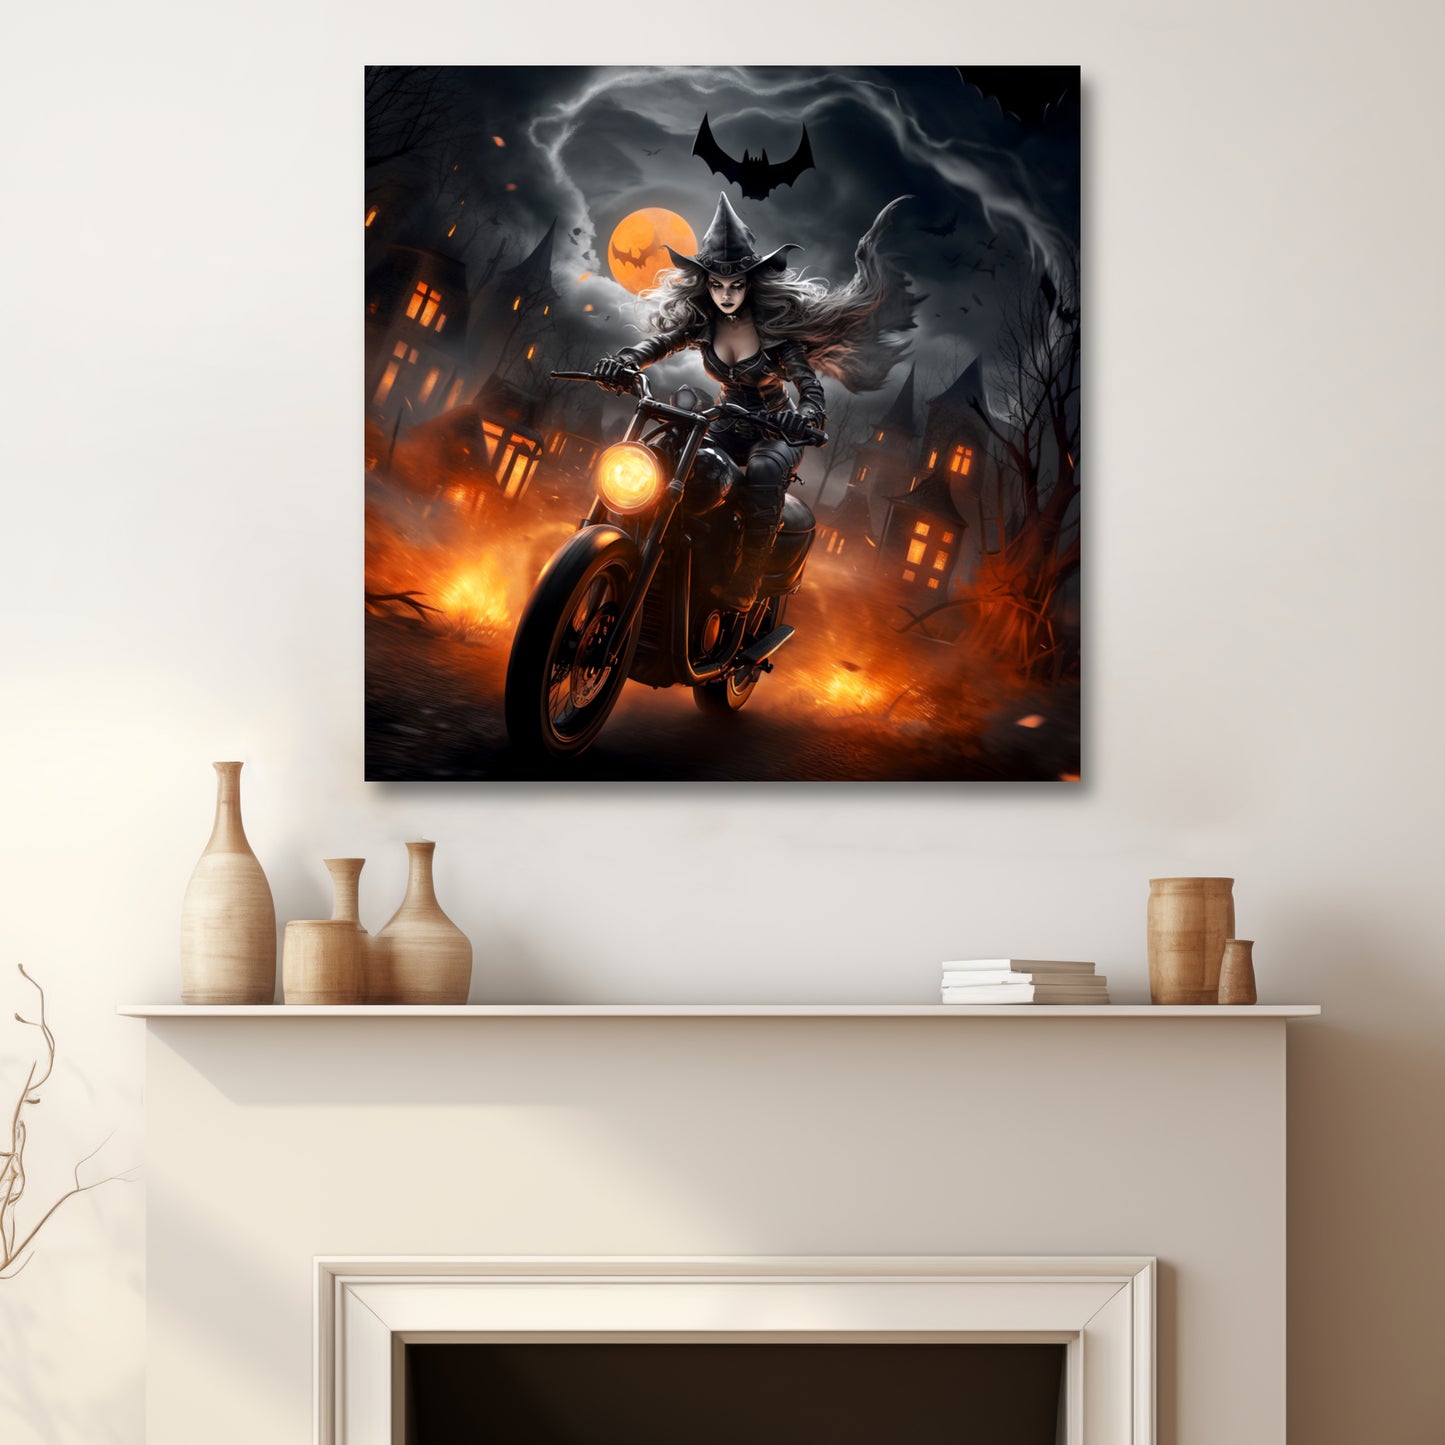 aesthetic halloween canvas print witch riding motorcycle, witch on motorcycle halloween art decor gifts